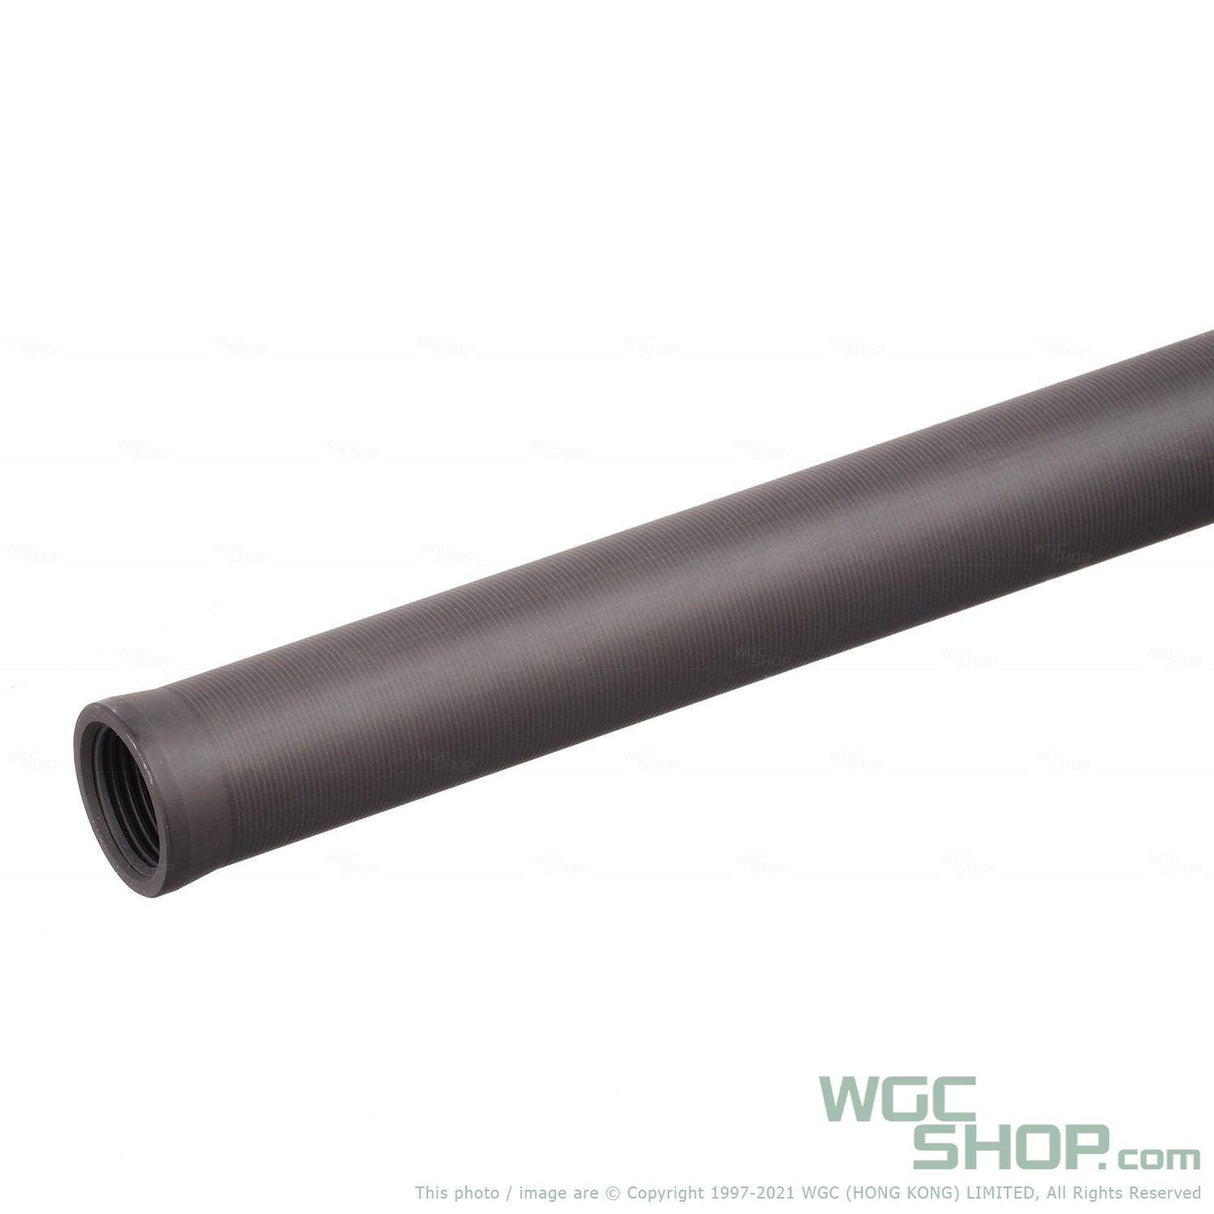 dnA M16A1 20 Inch Steel Airsoft Outer Barrel ( Early Type ) - WGC Shop